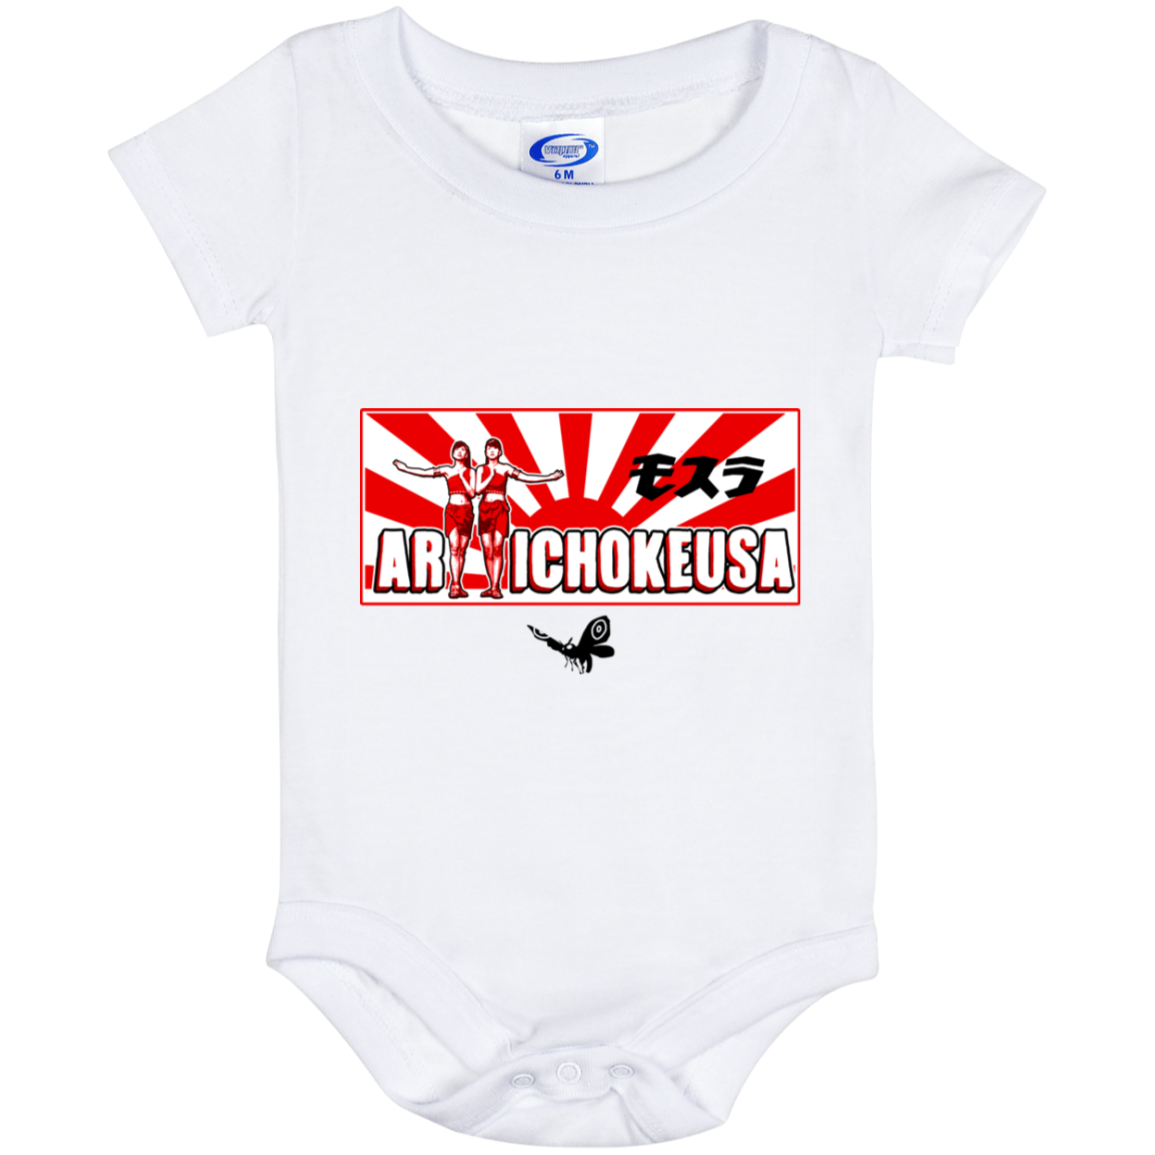 ArtichokeUSA Character and Font design. Shobijin (Twins)/Mothra Fan Art . Let's Create Your Own Design Today. Baby Onesie 6 Month